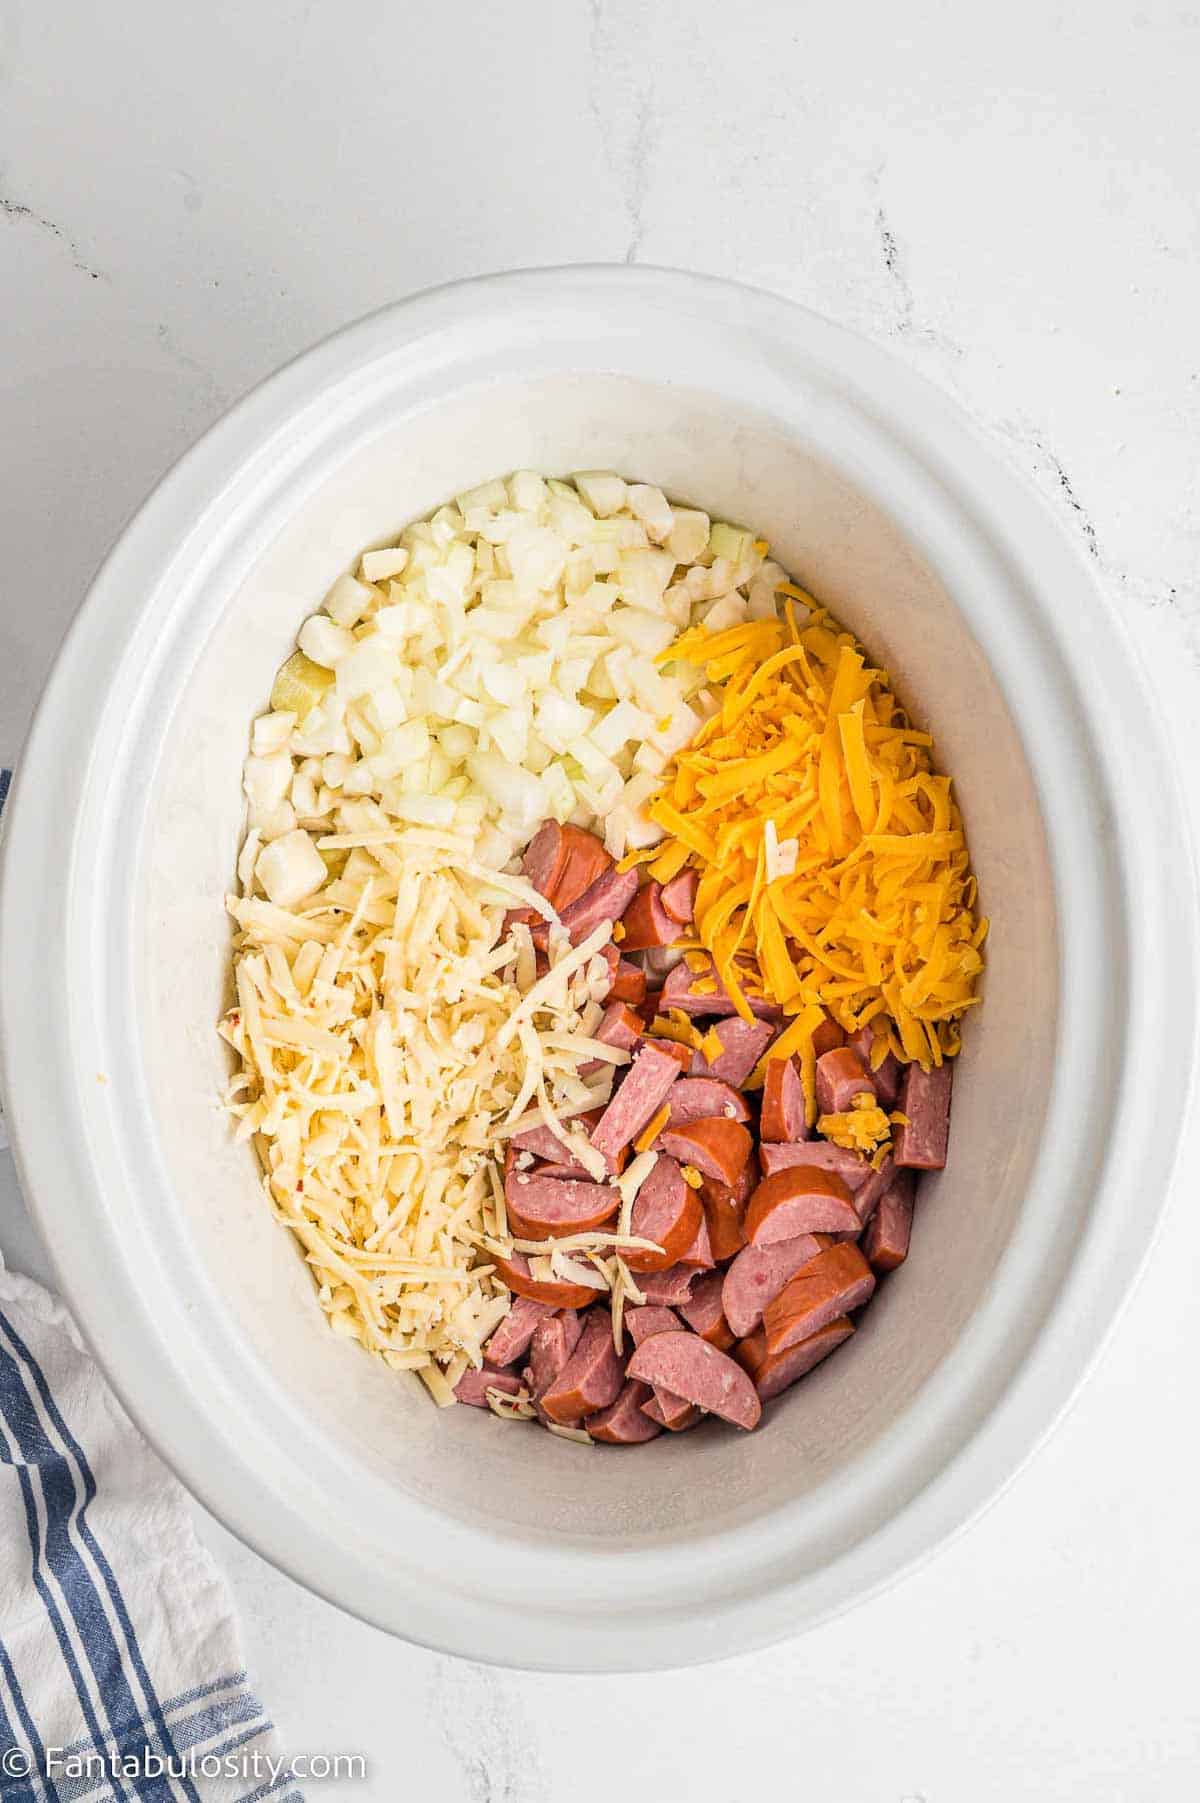 Ingredients in slow cooker for sausage and potato casserole.